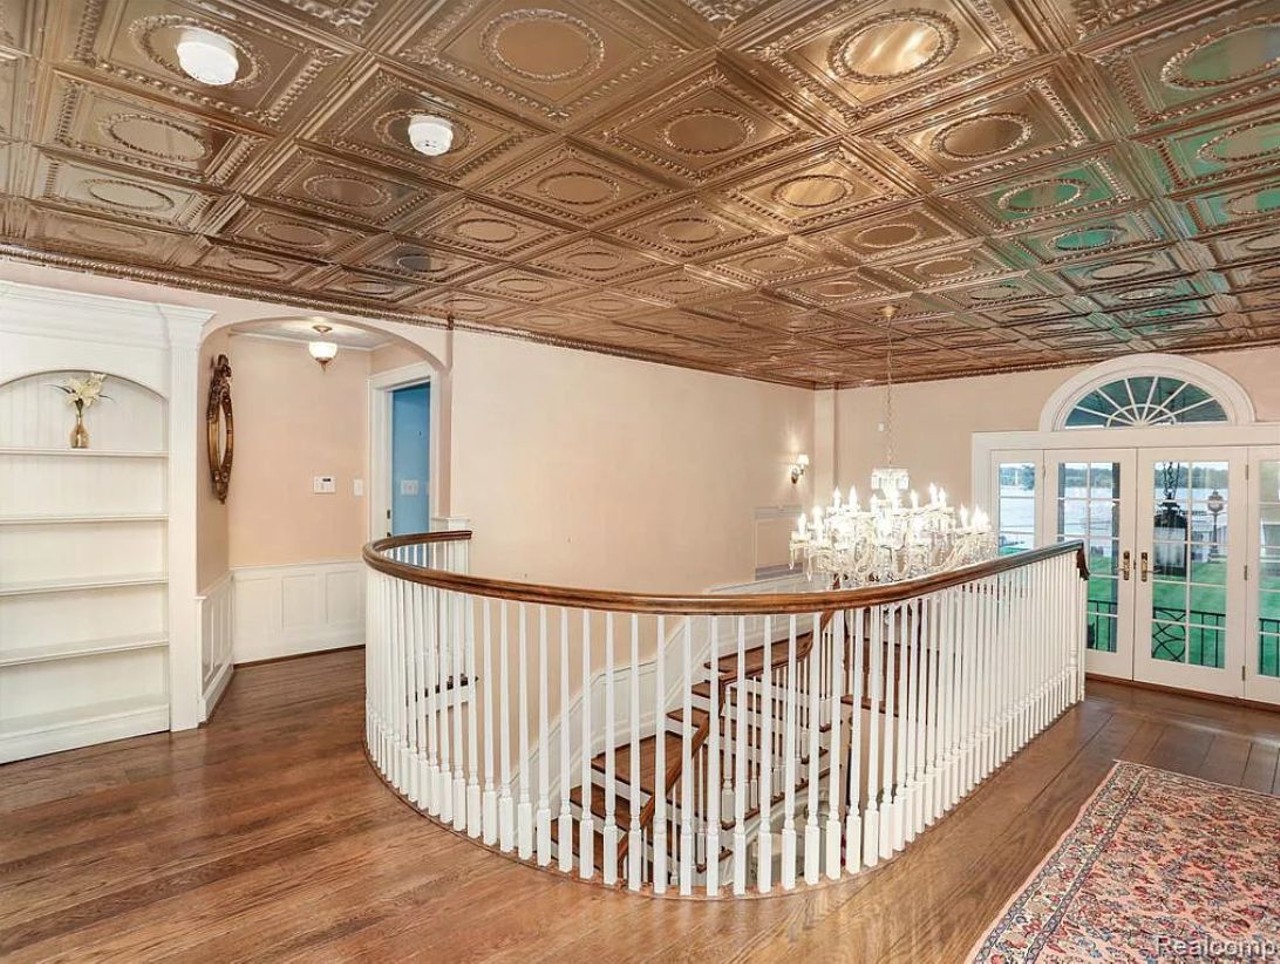 Kid Rock's Detroit home is back on the market for $2.2M &#151; let's take a tour